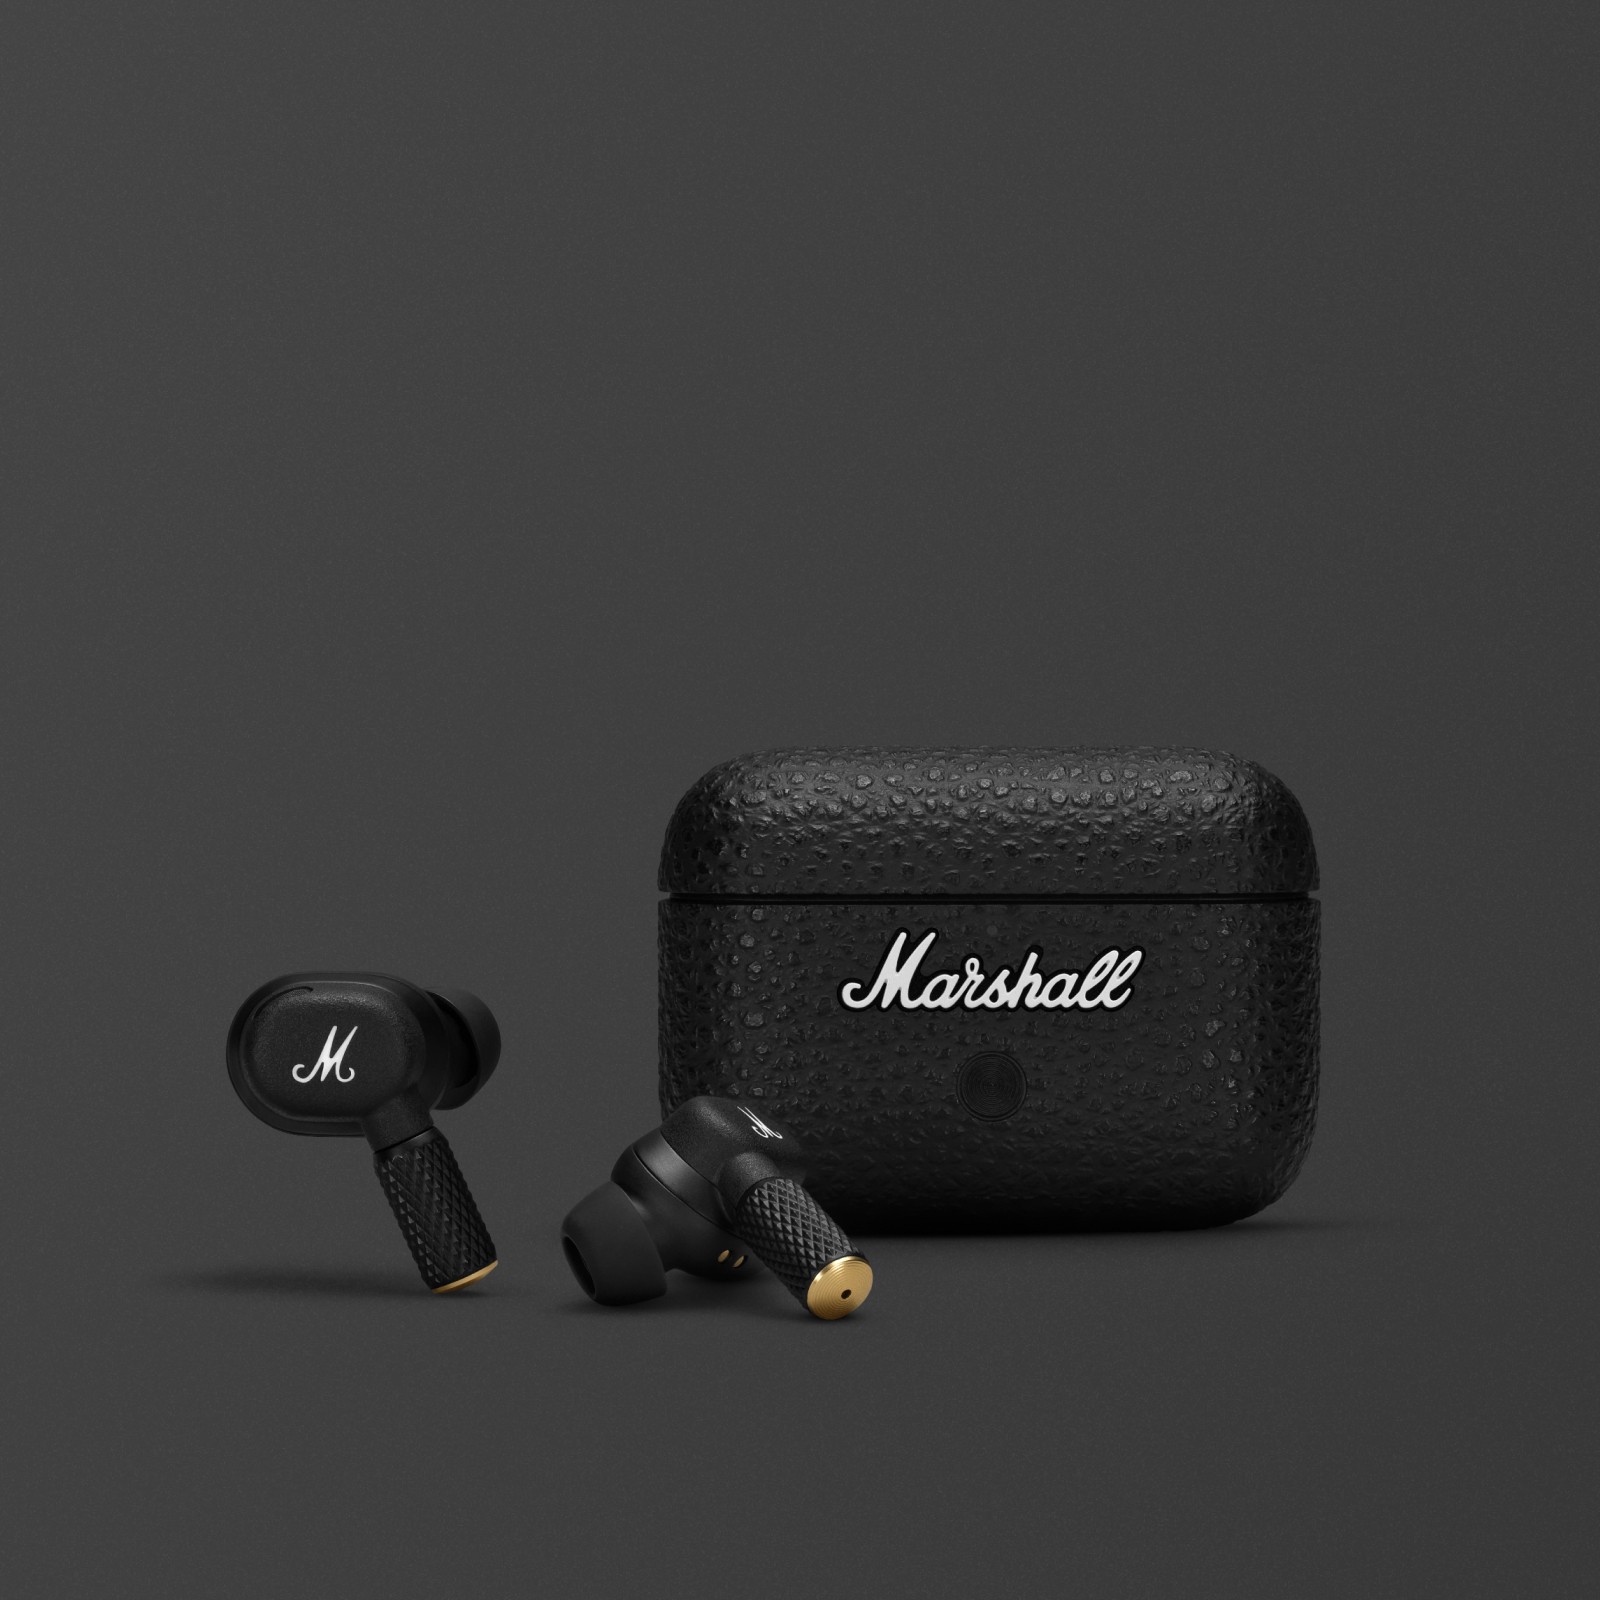 Marshall MOTIF II A.N.C. headphones in black with a gold case.